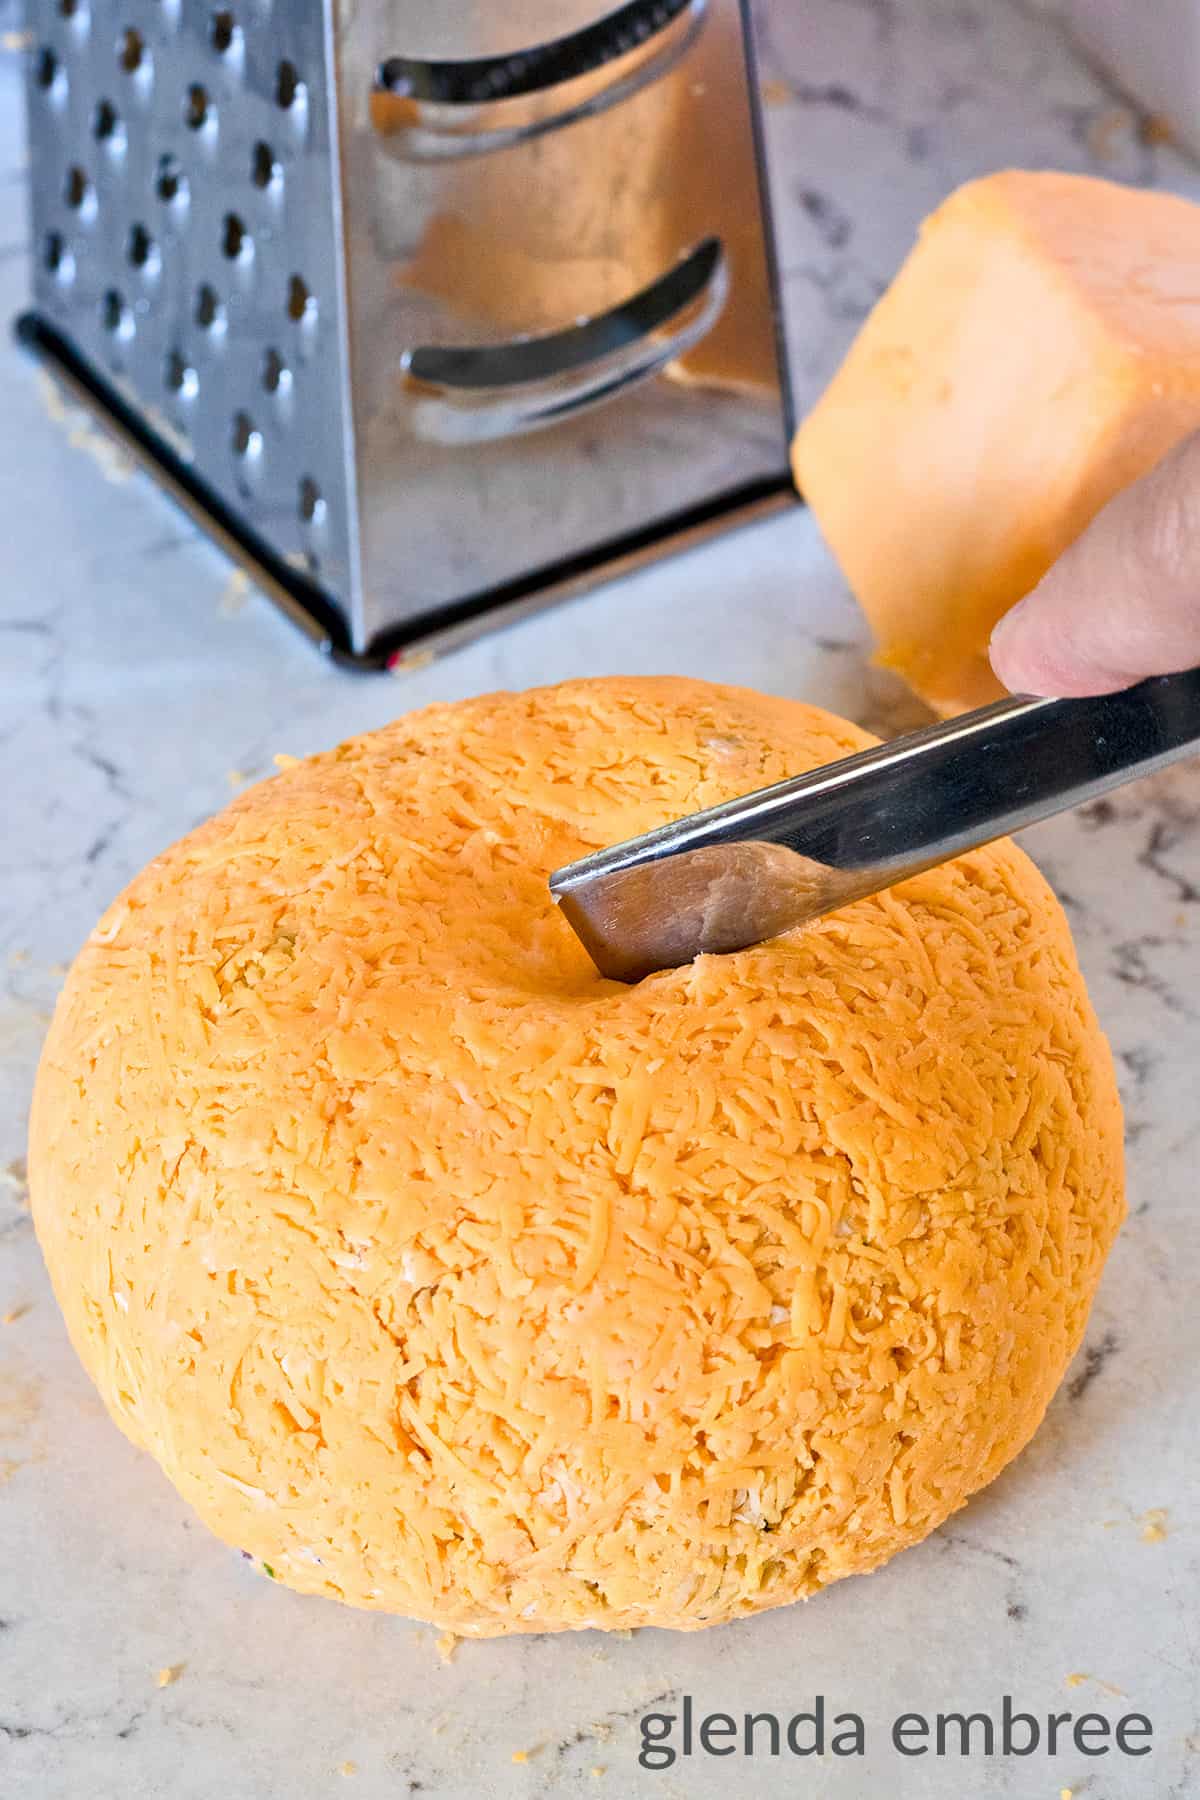 using a butter knife to make decorative indentations into a Bacon and Pineapple Cheese Ball